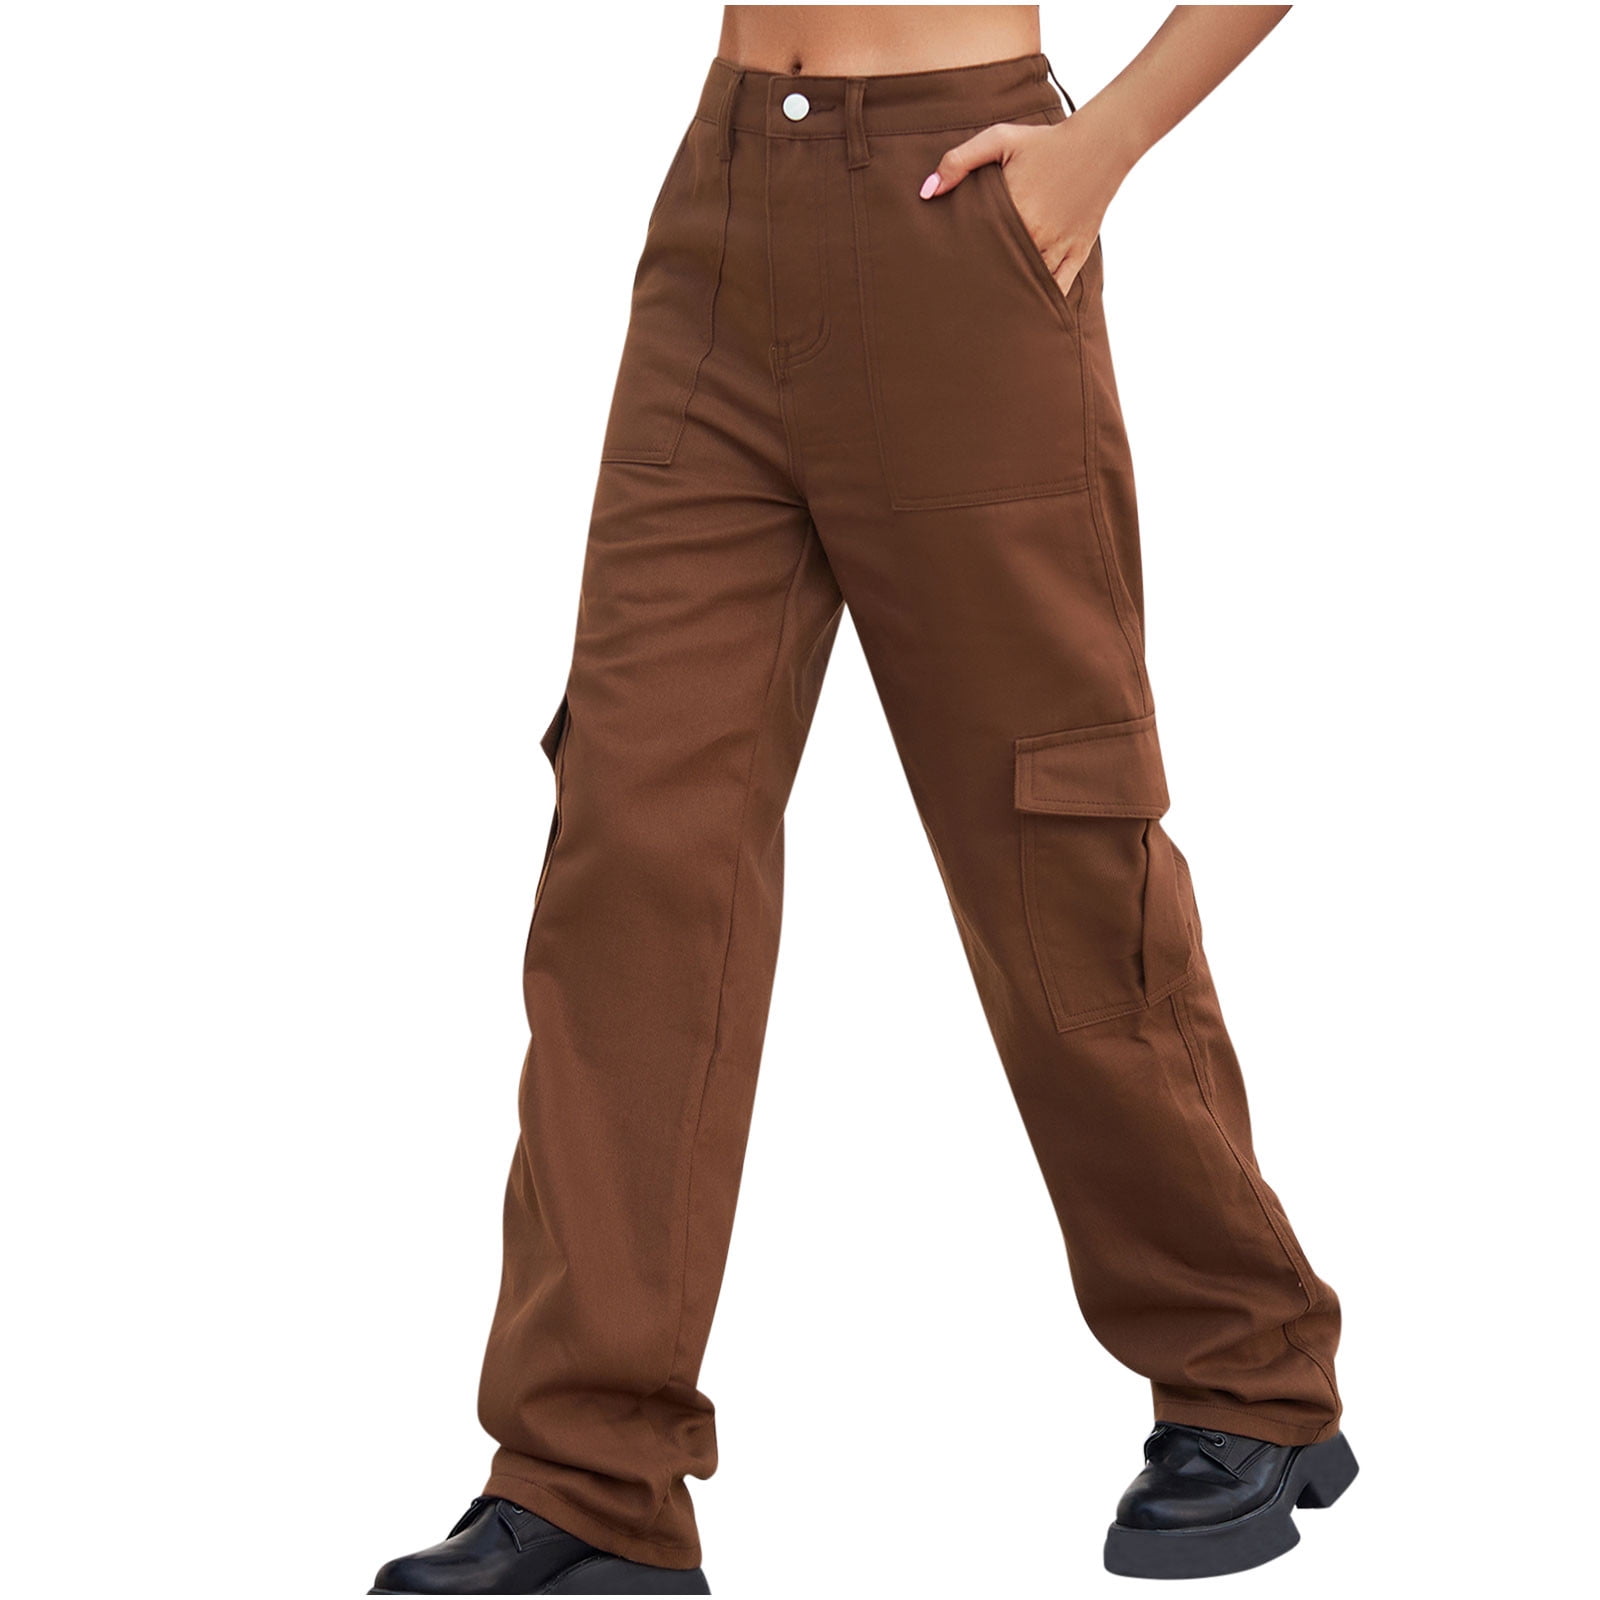 RQYYD Women's Cargo Pants High Waist Stretch Jeans Wide Leg Baggy Pockets  Solid Casual Lightweight Straight Y2K Pants(Brown,L) 